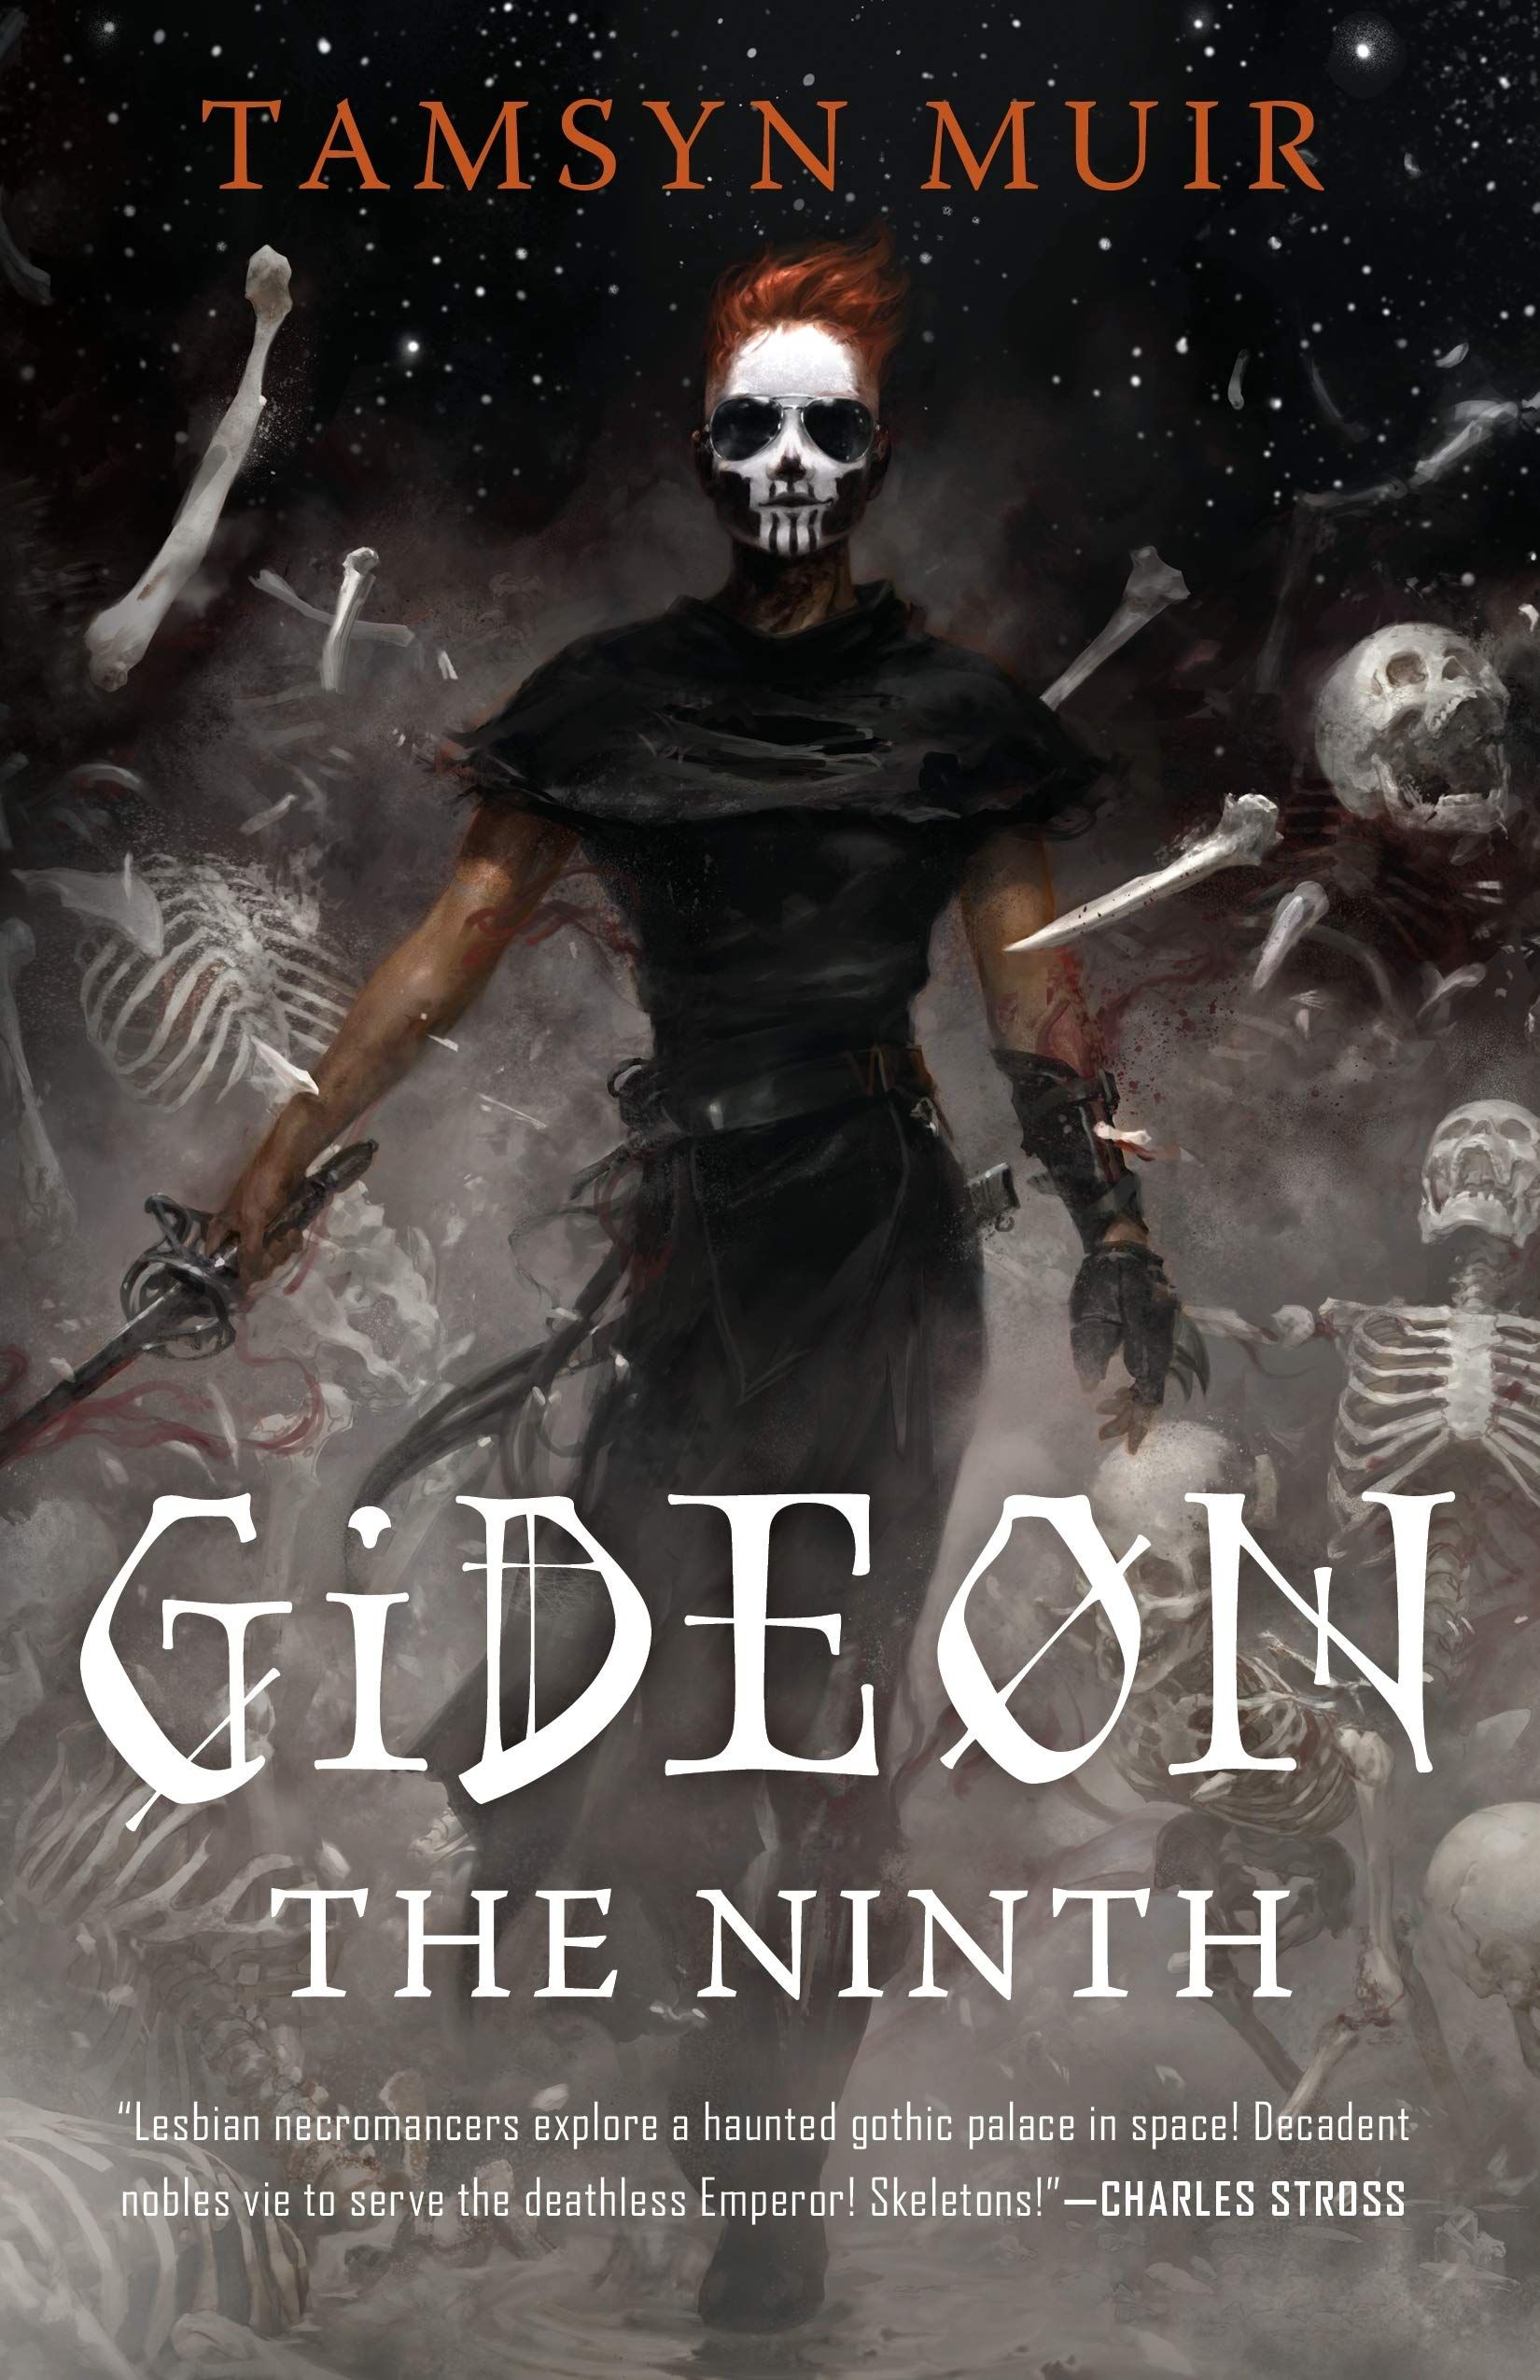 Gideon the Ninth cover